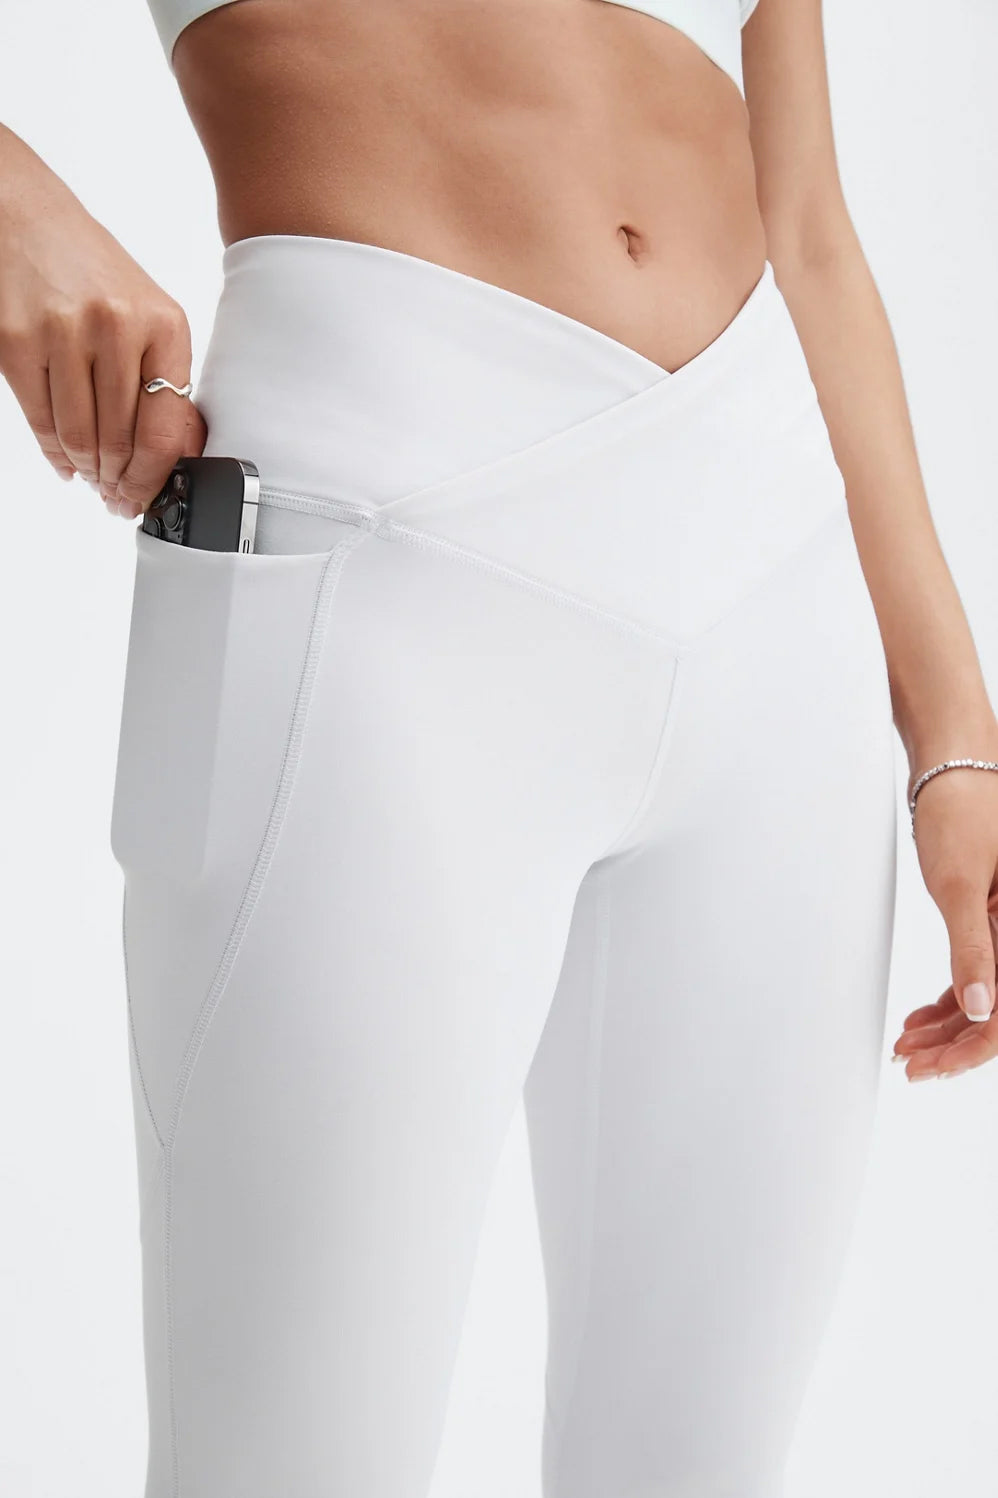 Neue Supply Co. Crossover Leggings with Pockets in White